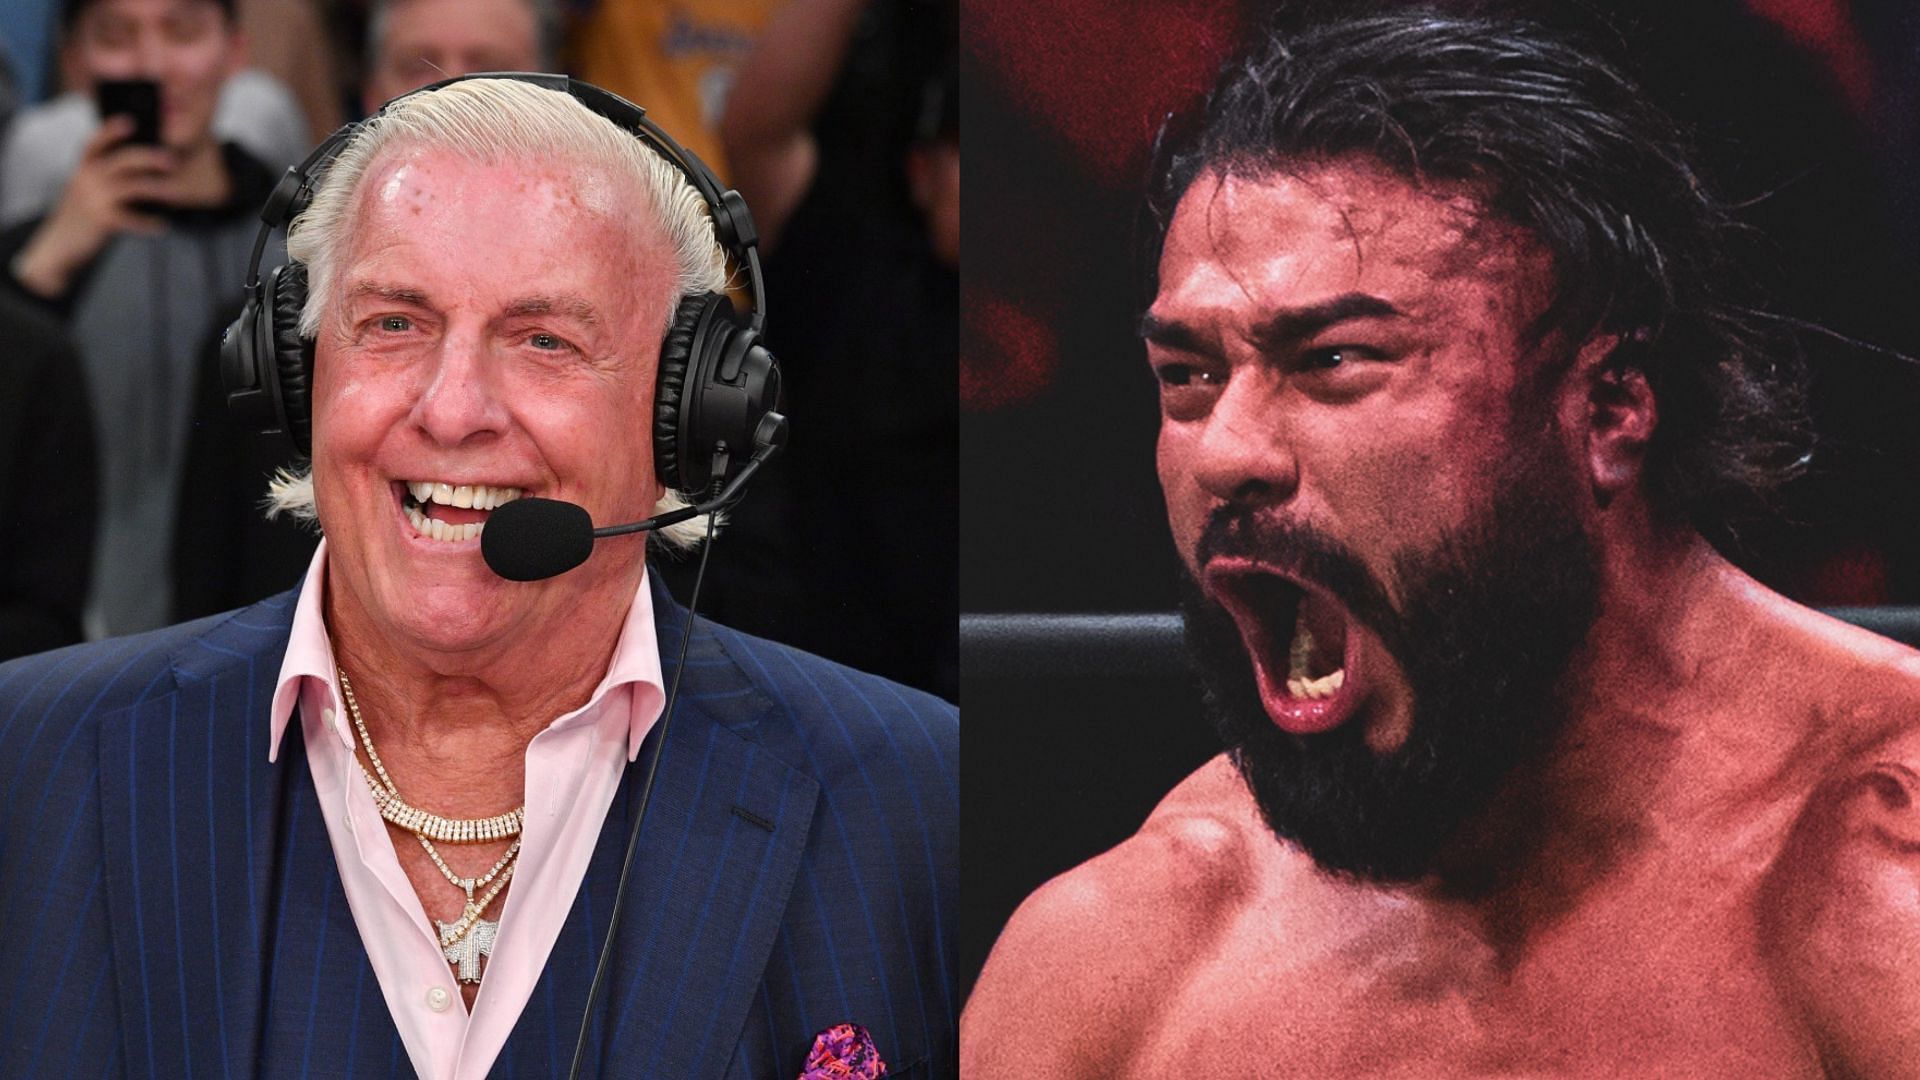 Ric Flair has an update on Andrade El Idolo